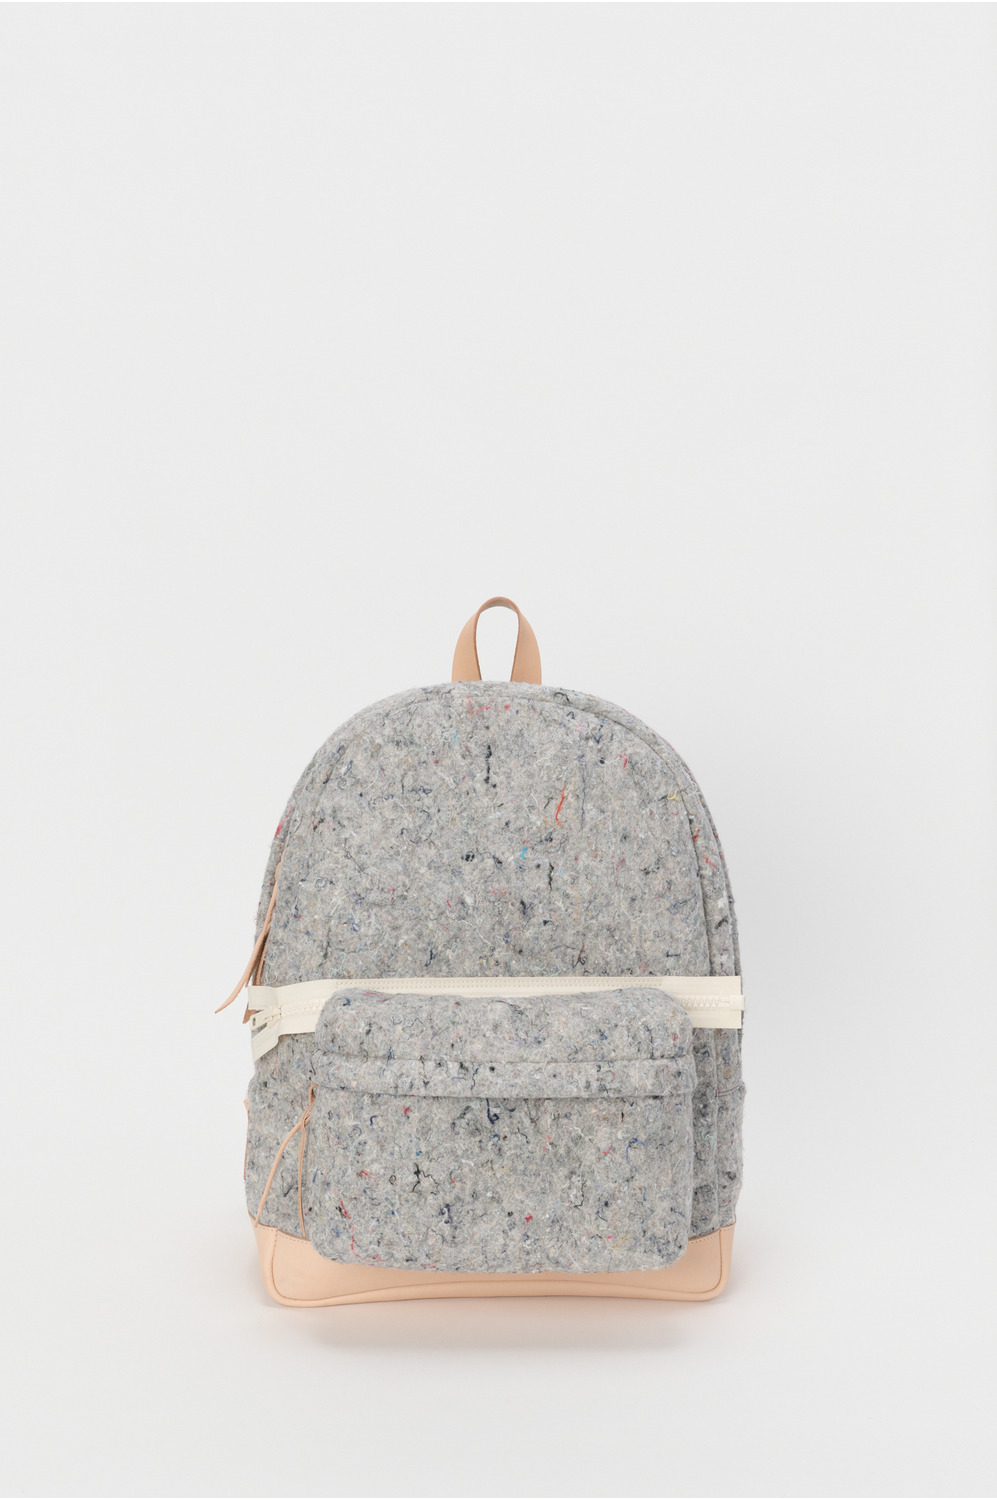 Recycled felt) backpack 詳細画像 mix gray/natural 1